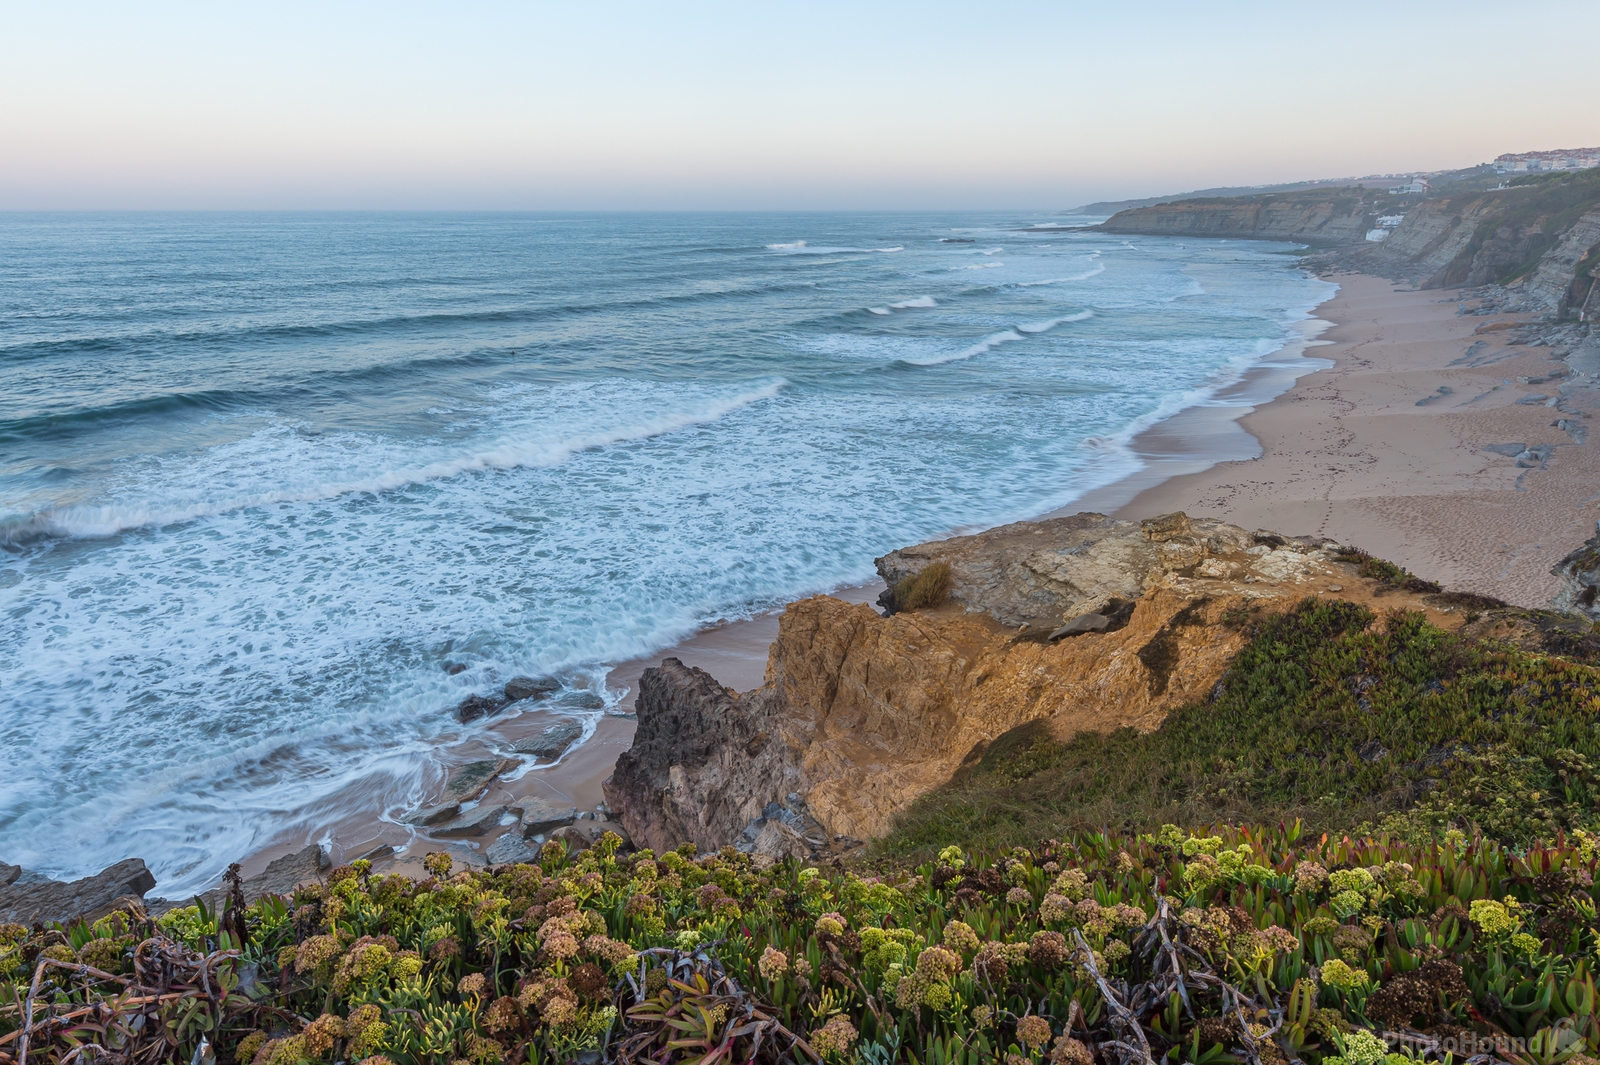 Image of Ericeira by Sue Wolfe